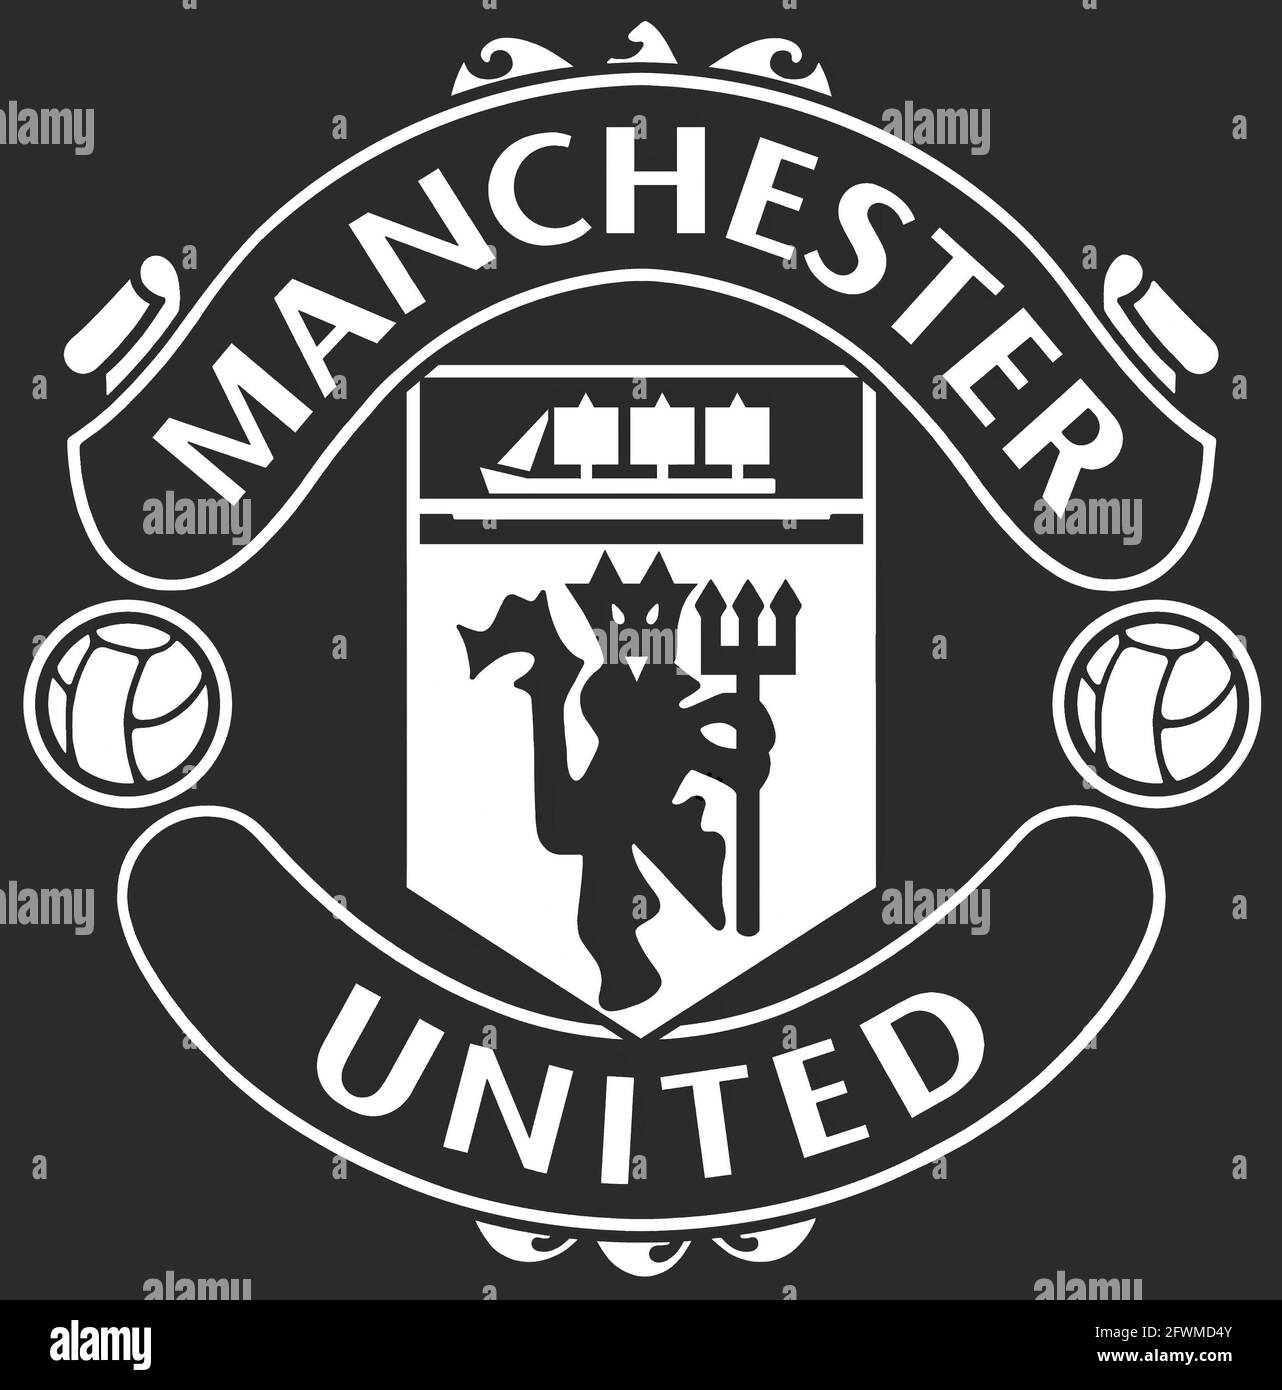 Manchester United Football Club red devil badge Stock Photo